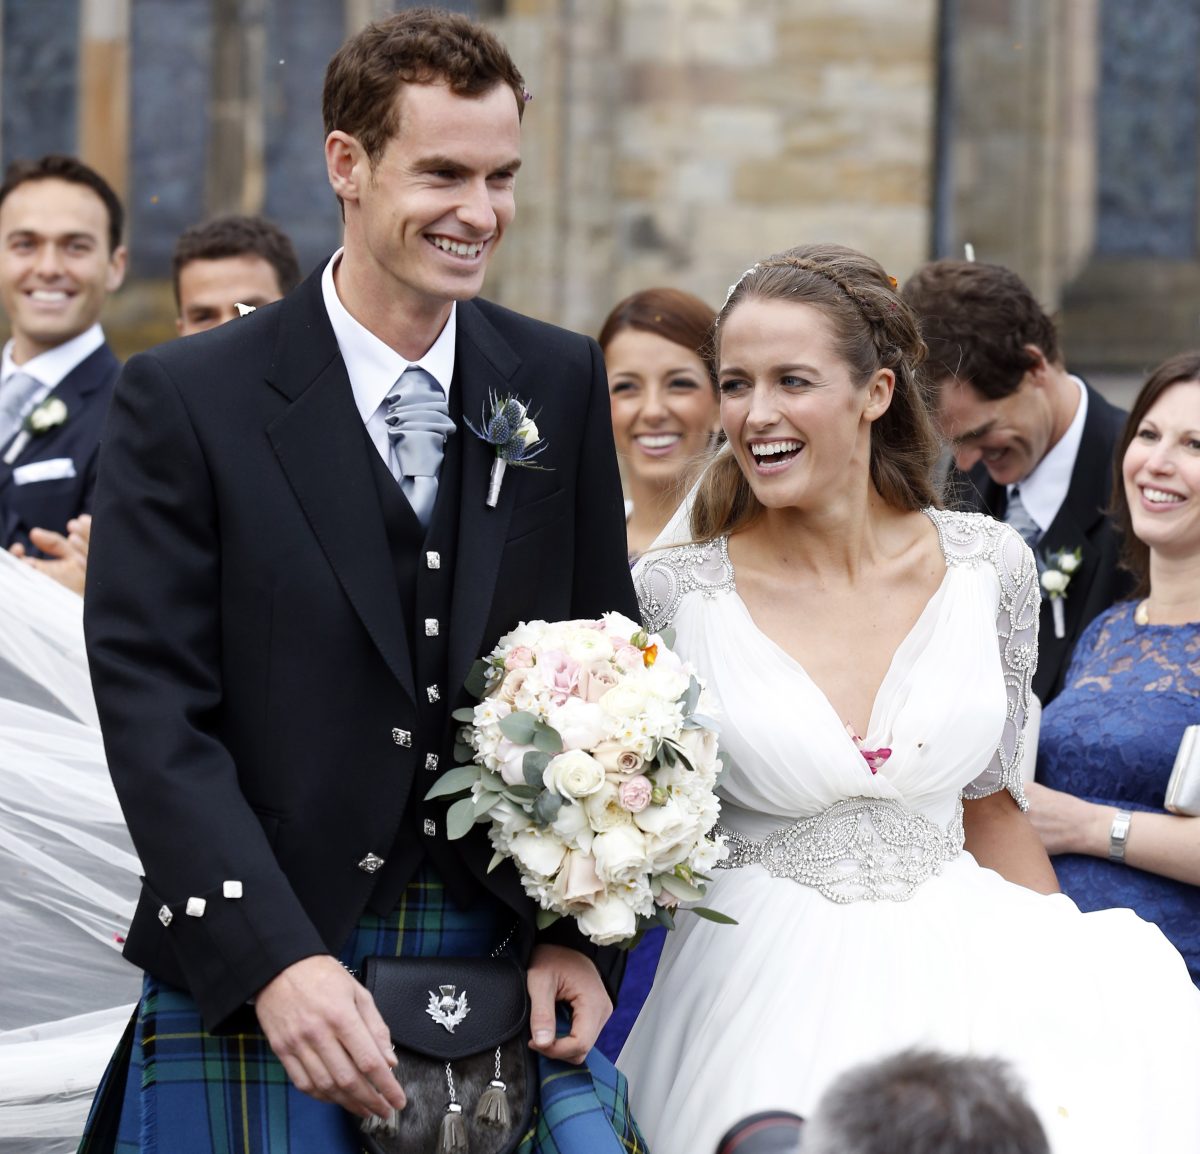 Andy Murray And Kim Sears Leave Dunblane Cathedral After Their Wedding In Dunblane Scotland E1688413955182 ?w=1024&h=985